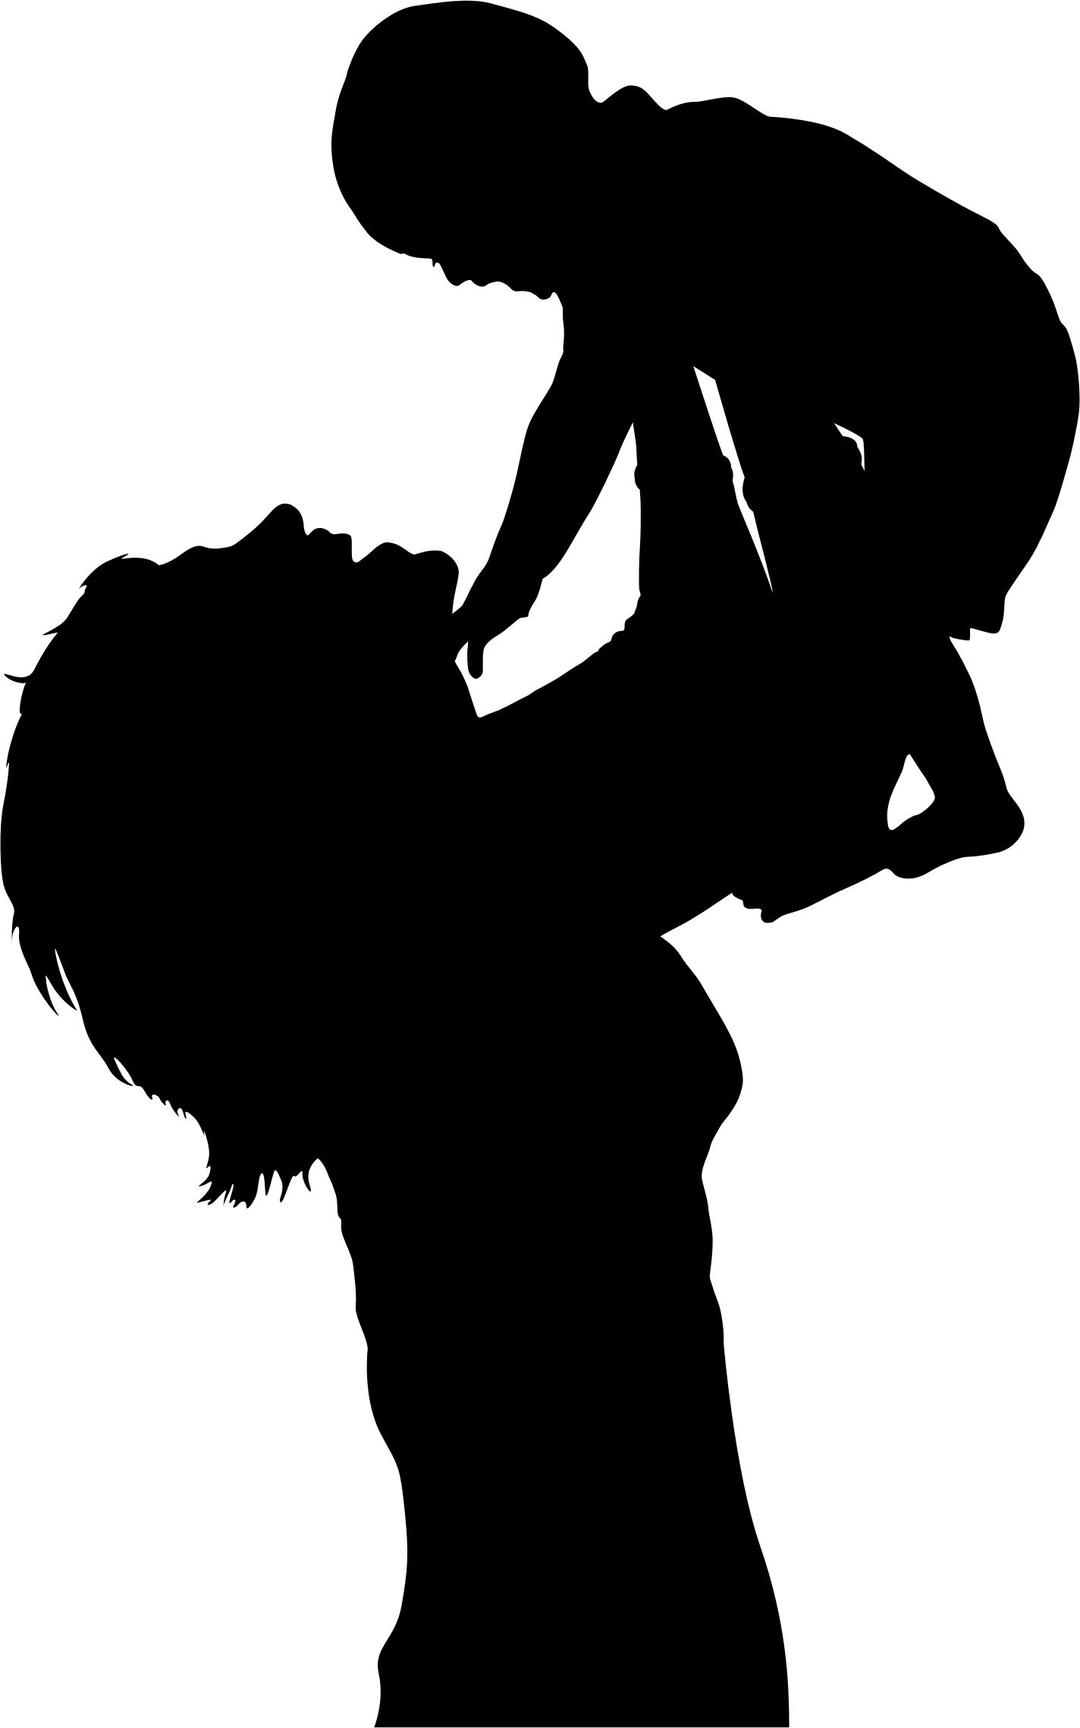 Mother And Baby Silhouette png transparent